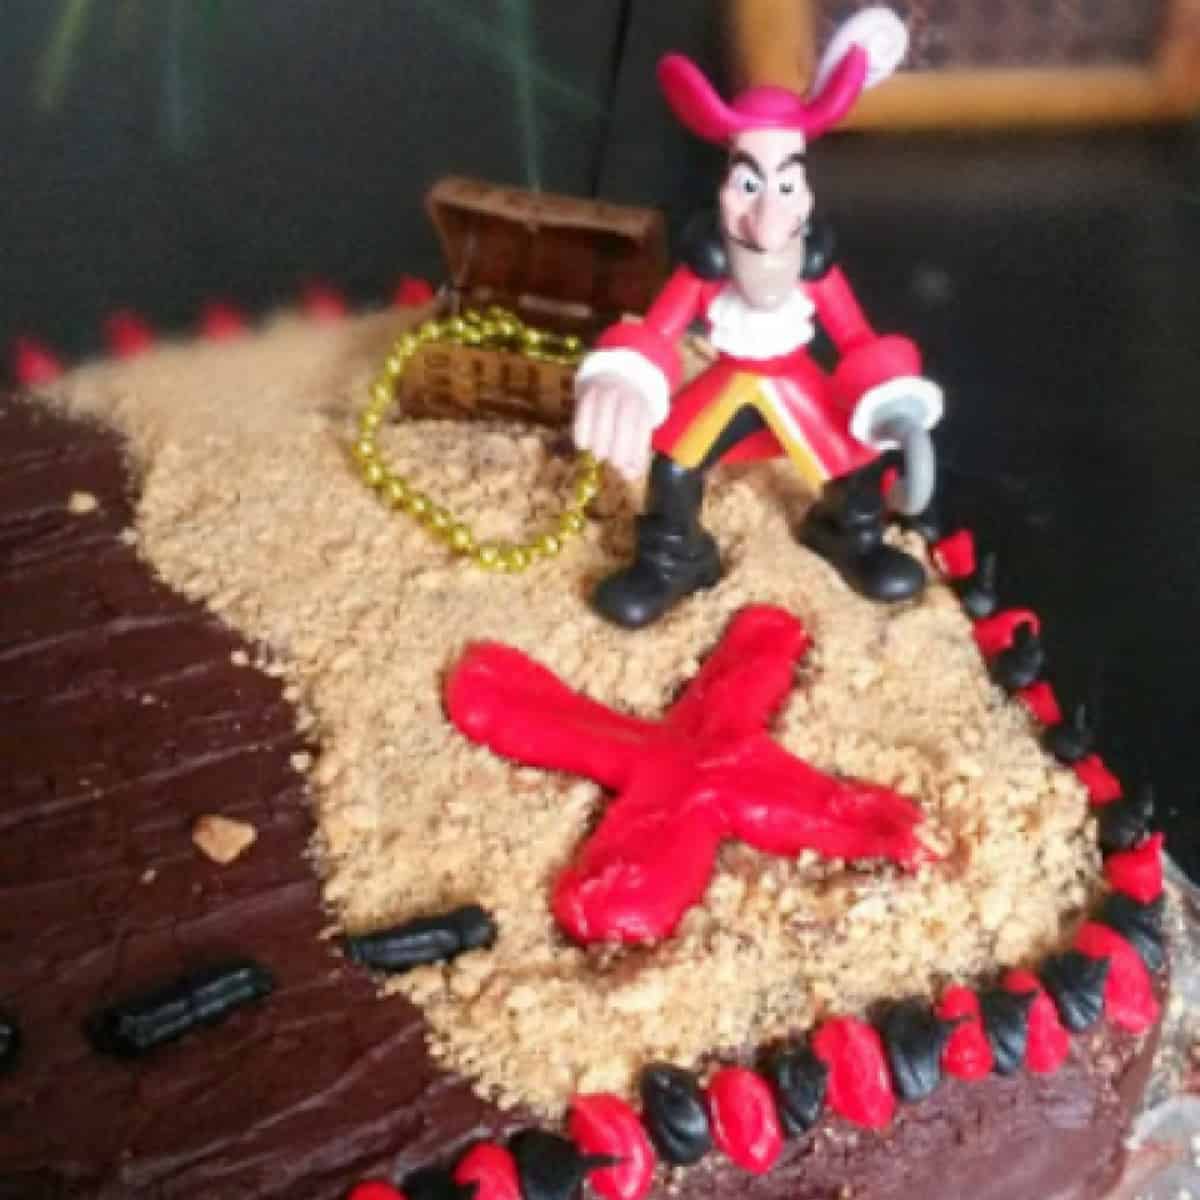 The image shows a chocolate cake with a pirate figurine on top of it. The cake is decorated with a red cross and a treasure chest.